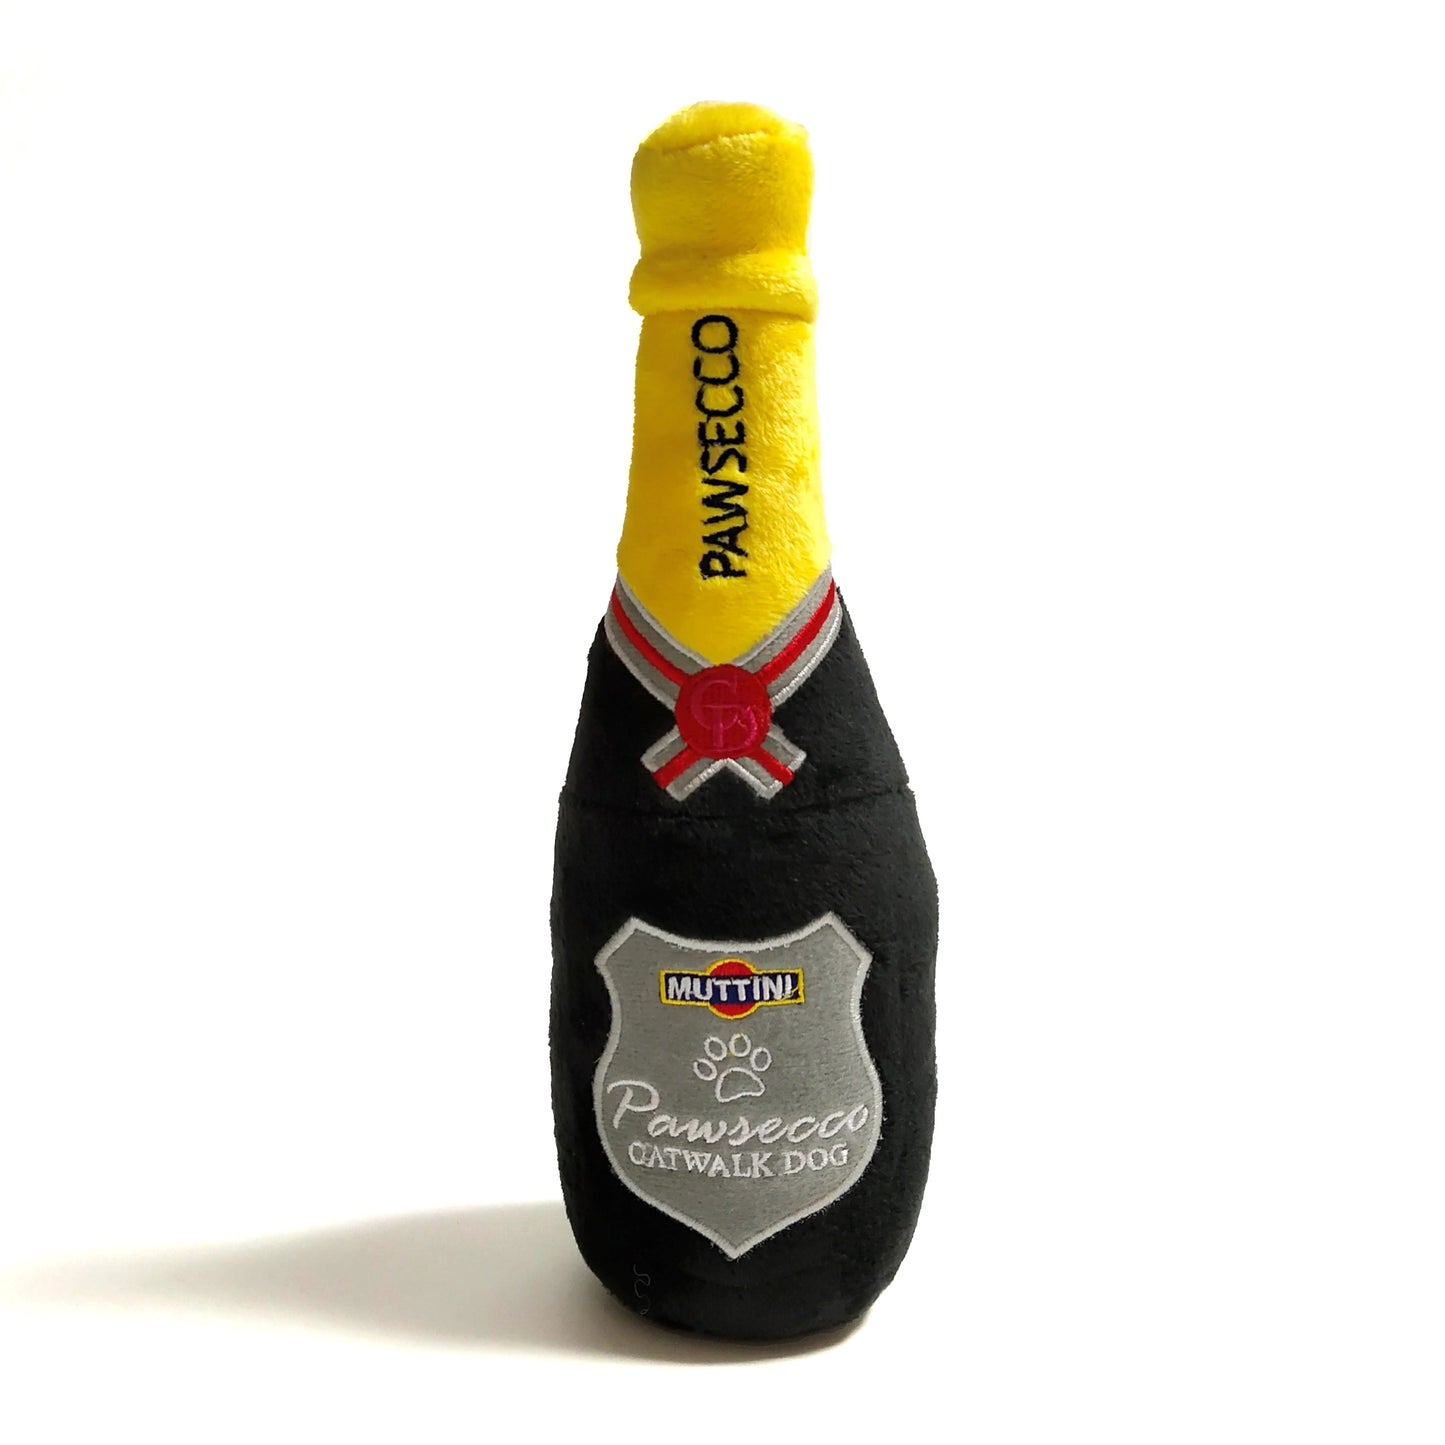 Pawsecco Bottle Toy